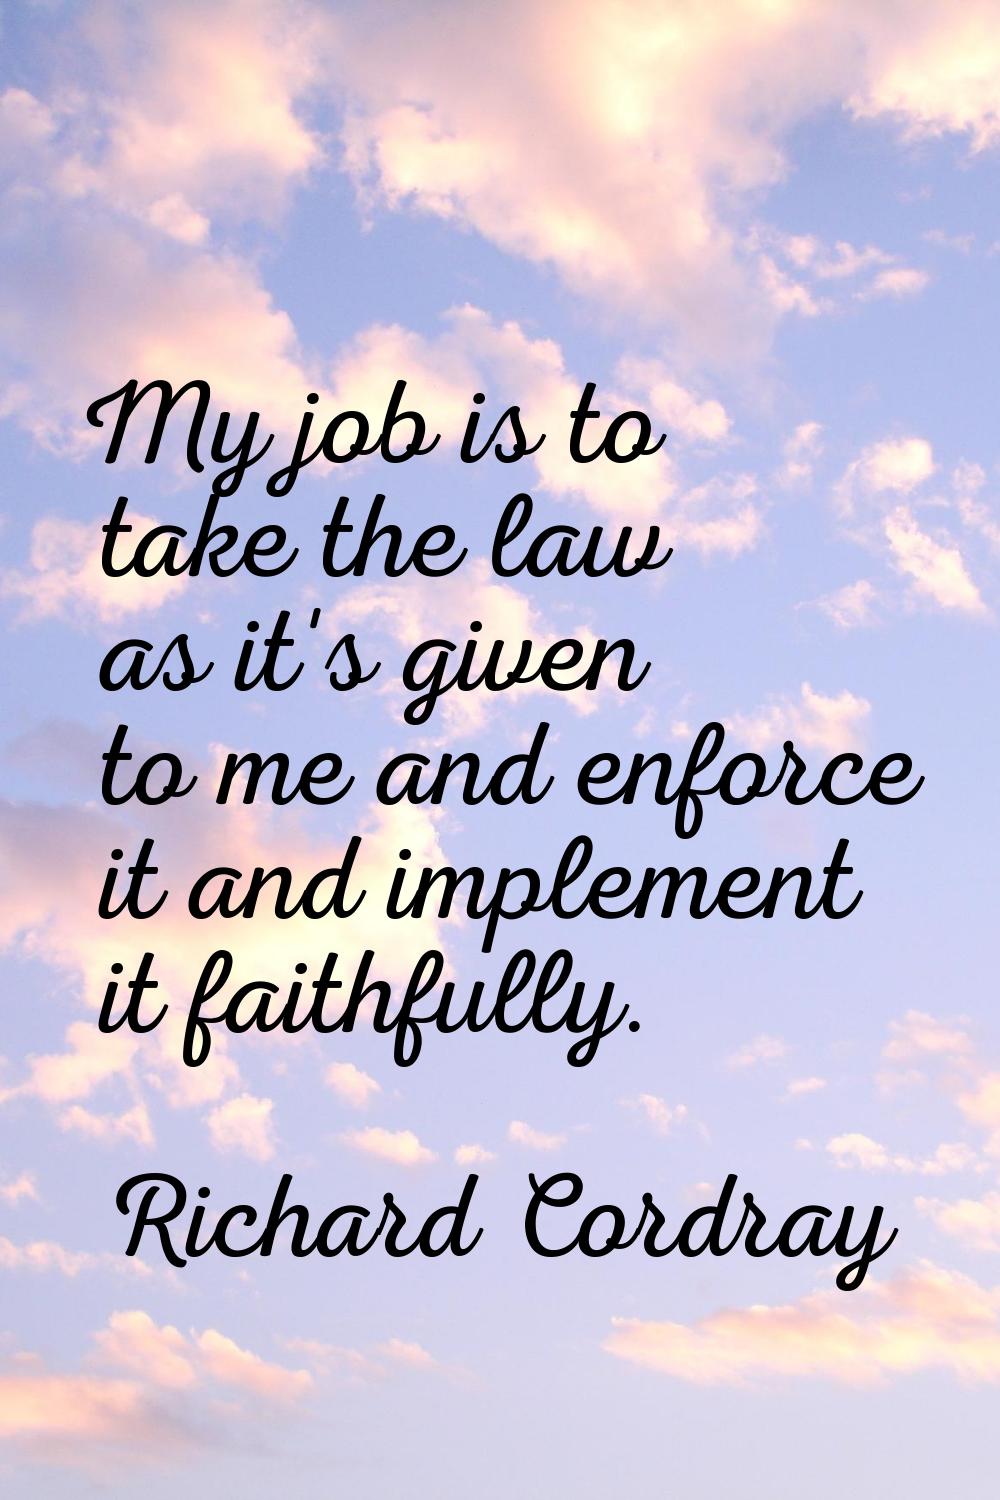 My job is to take the law as it's given to me and enforce it and implement it faithfully.